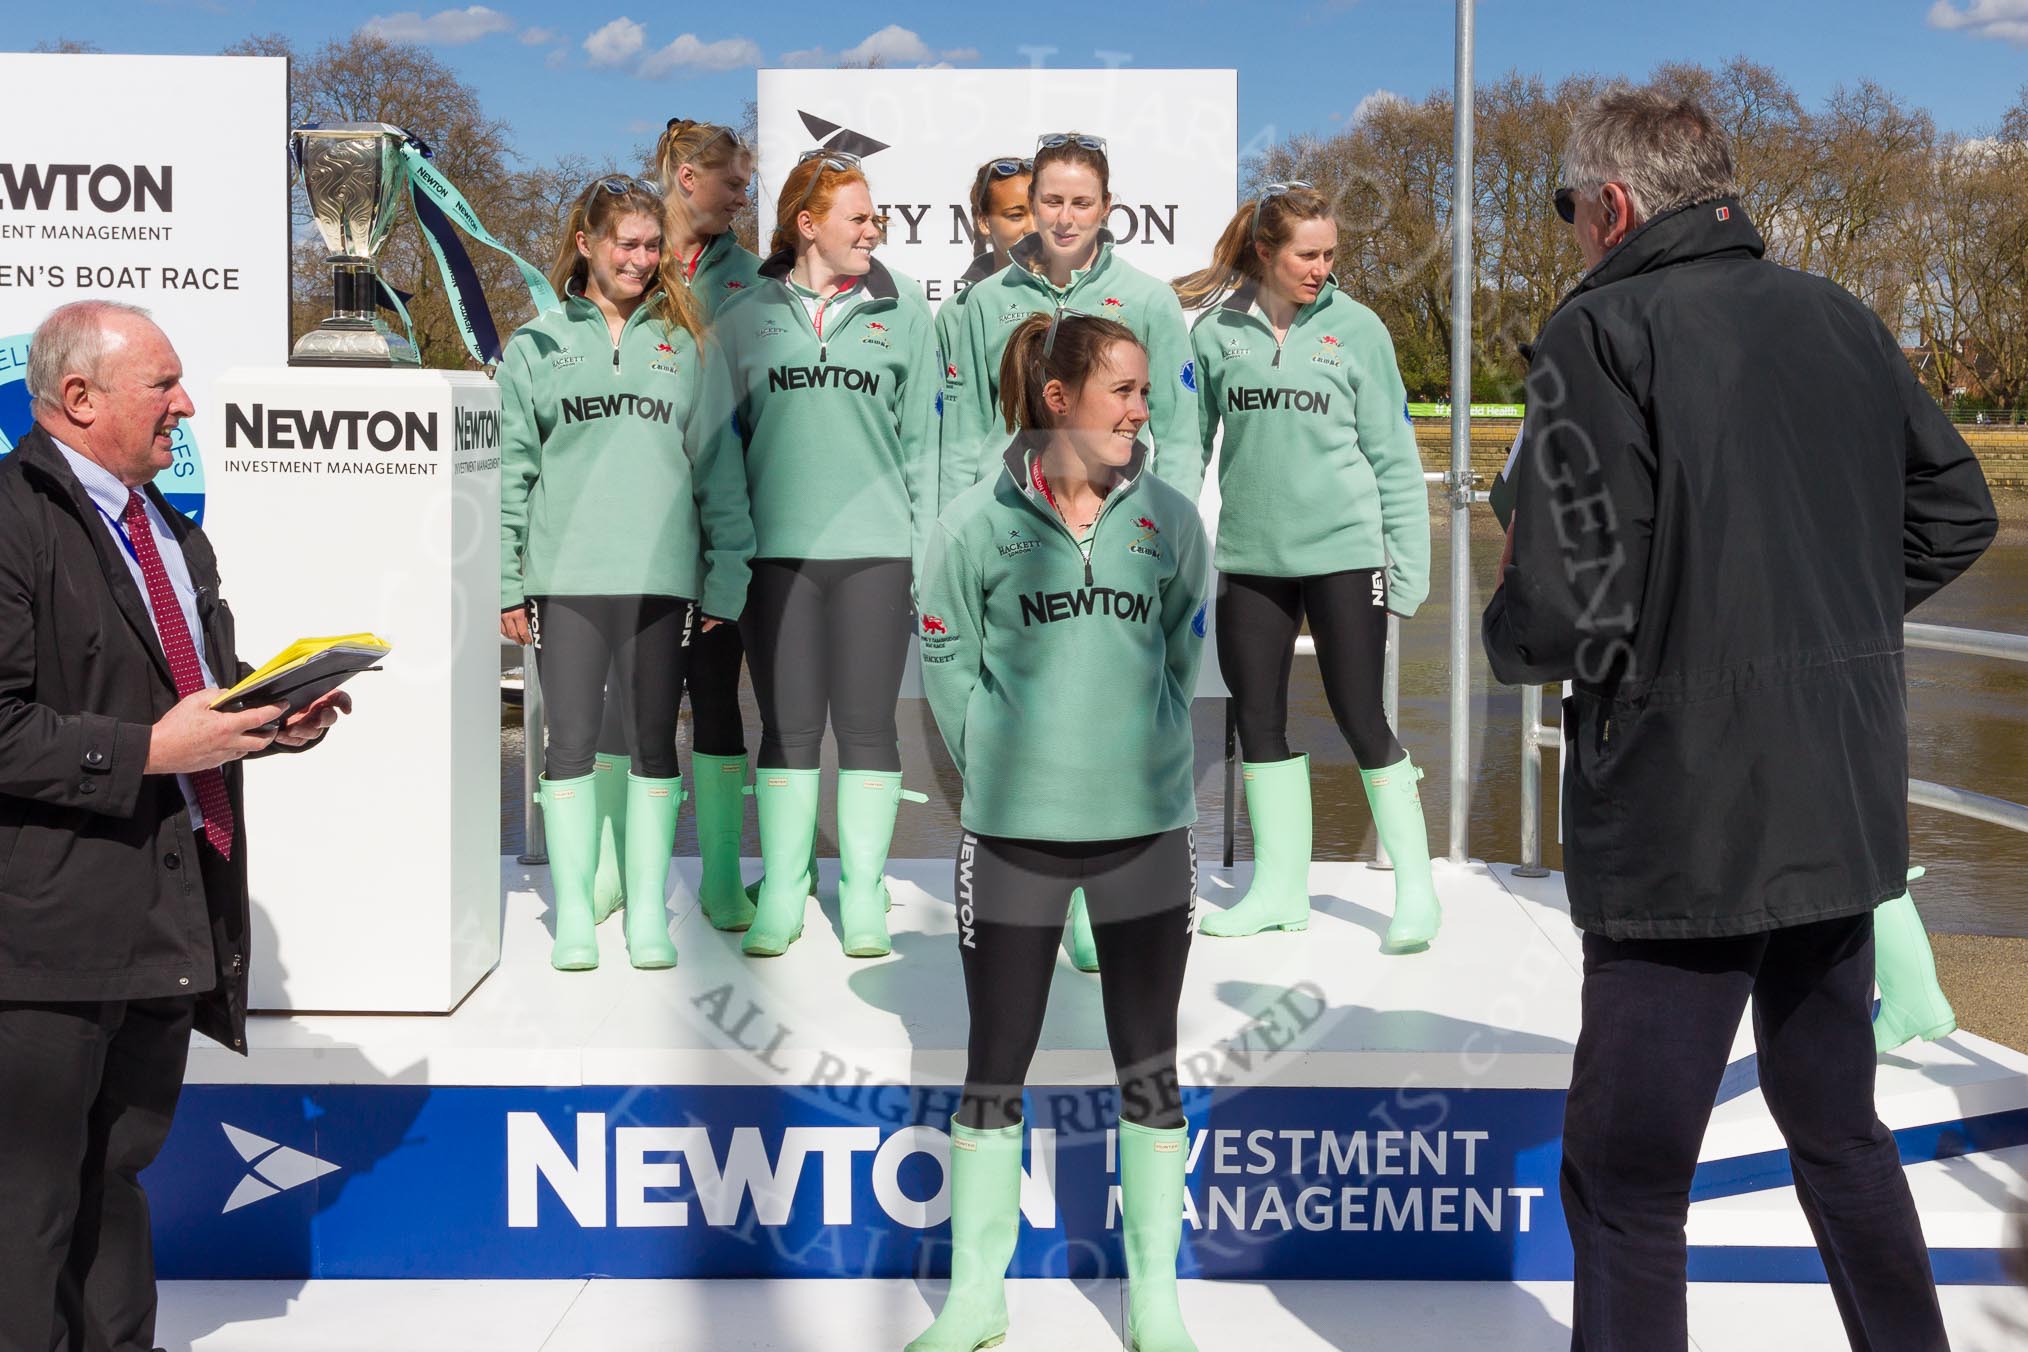 The Boat Race season 2015 - Newton Women's Boat Race.
River Thames between Putney and Mortlake,
London,

United Kingdom,
on 11 April 2015 at 14:58, image #35